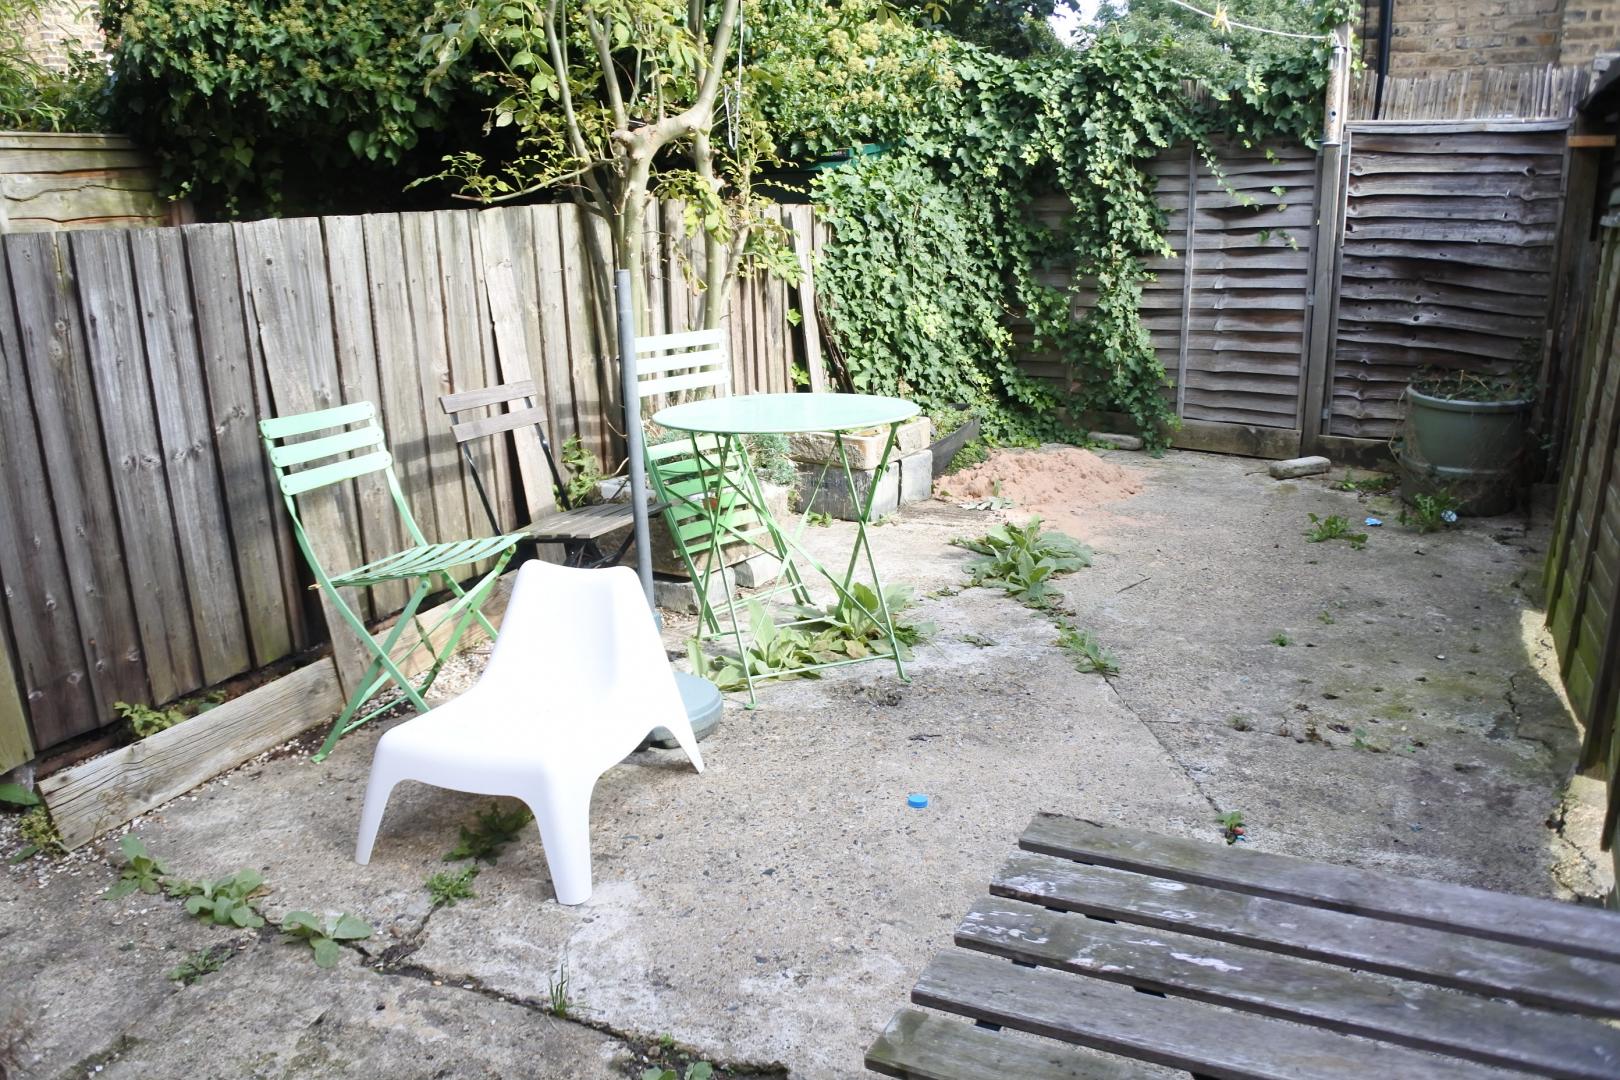 			Great Two Bed Property With Patio Garden !, 2 Bedroom, 1 bath, 1 reception Flat			 North View Road, Crouch End